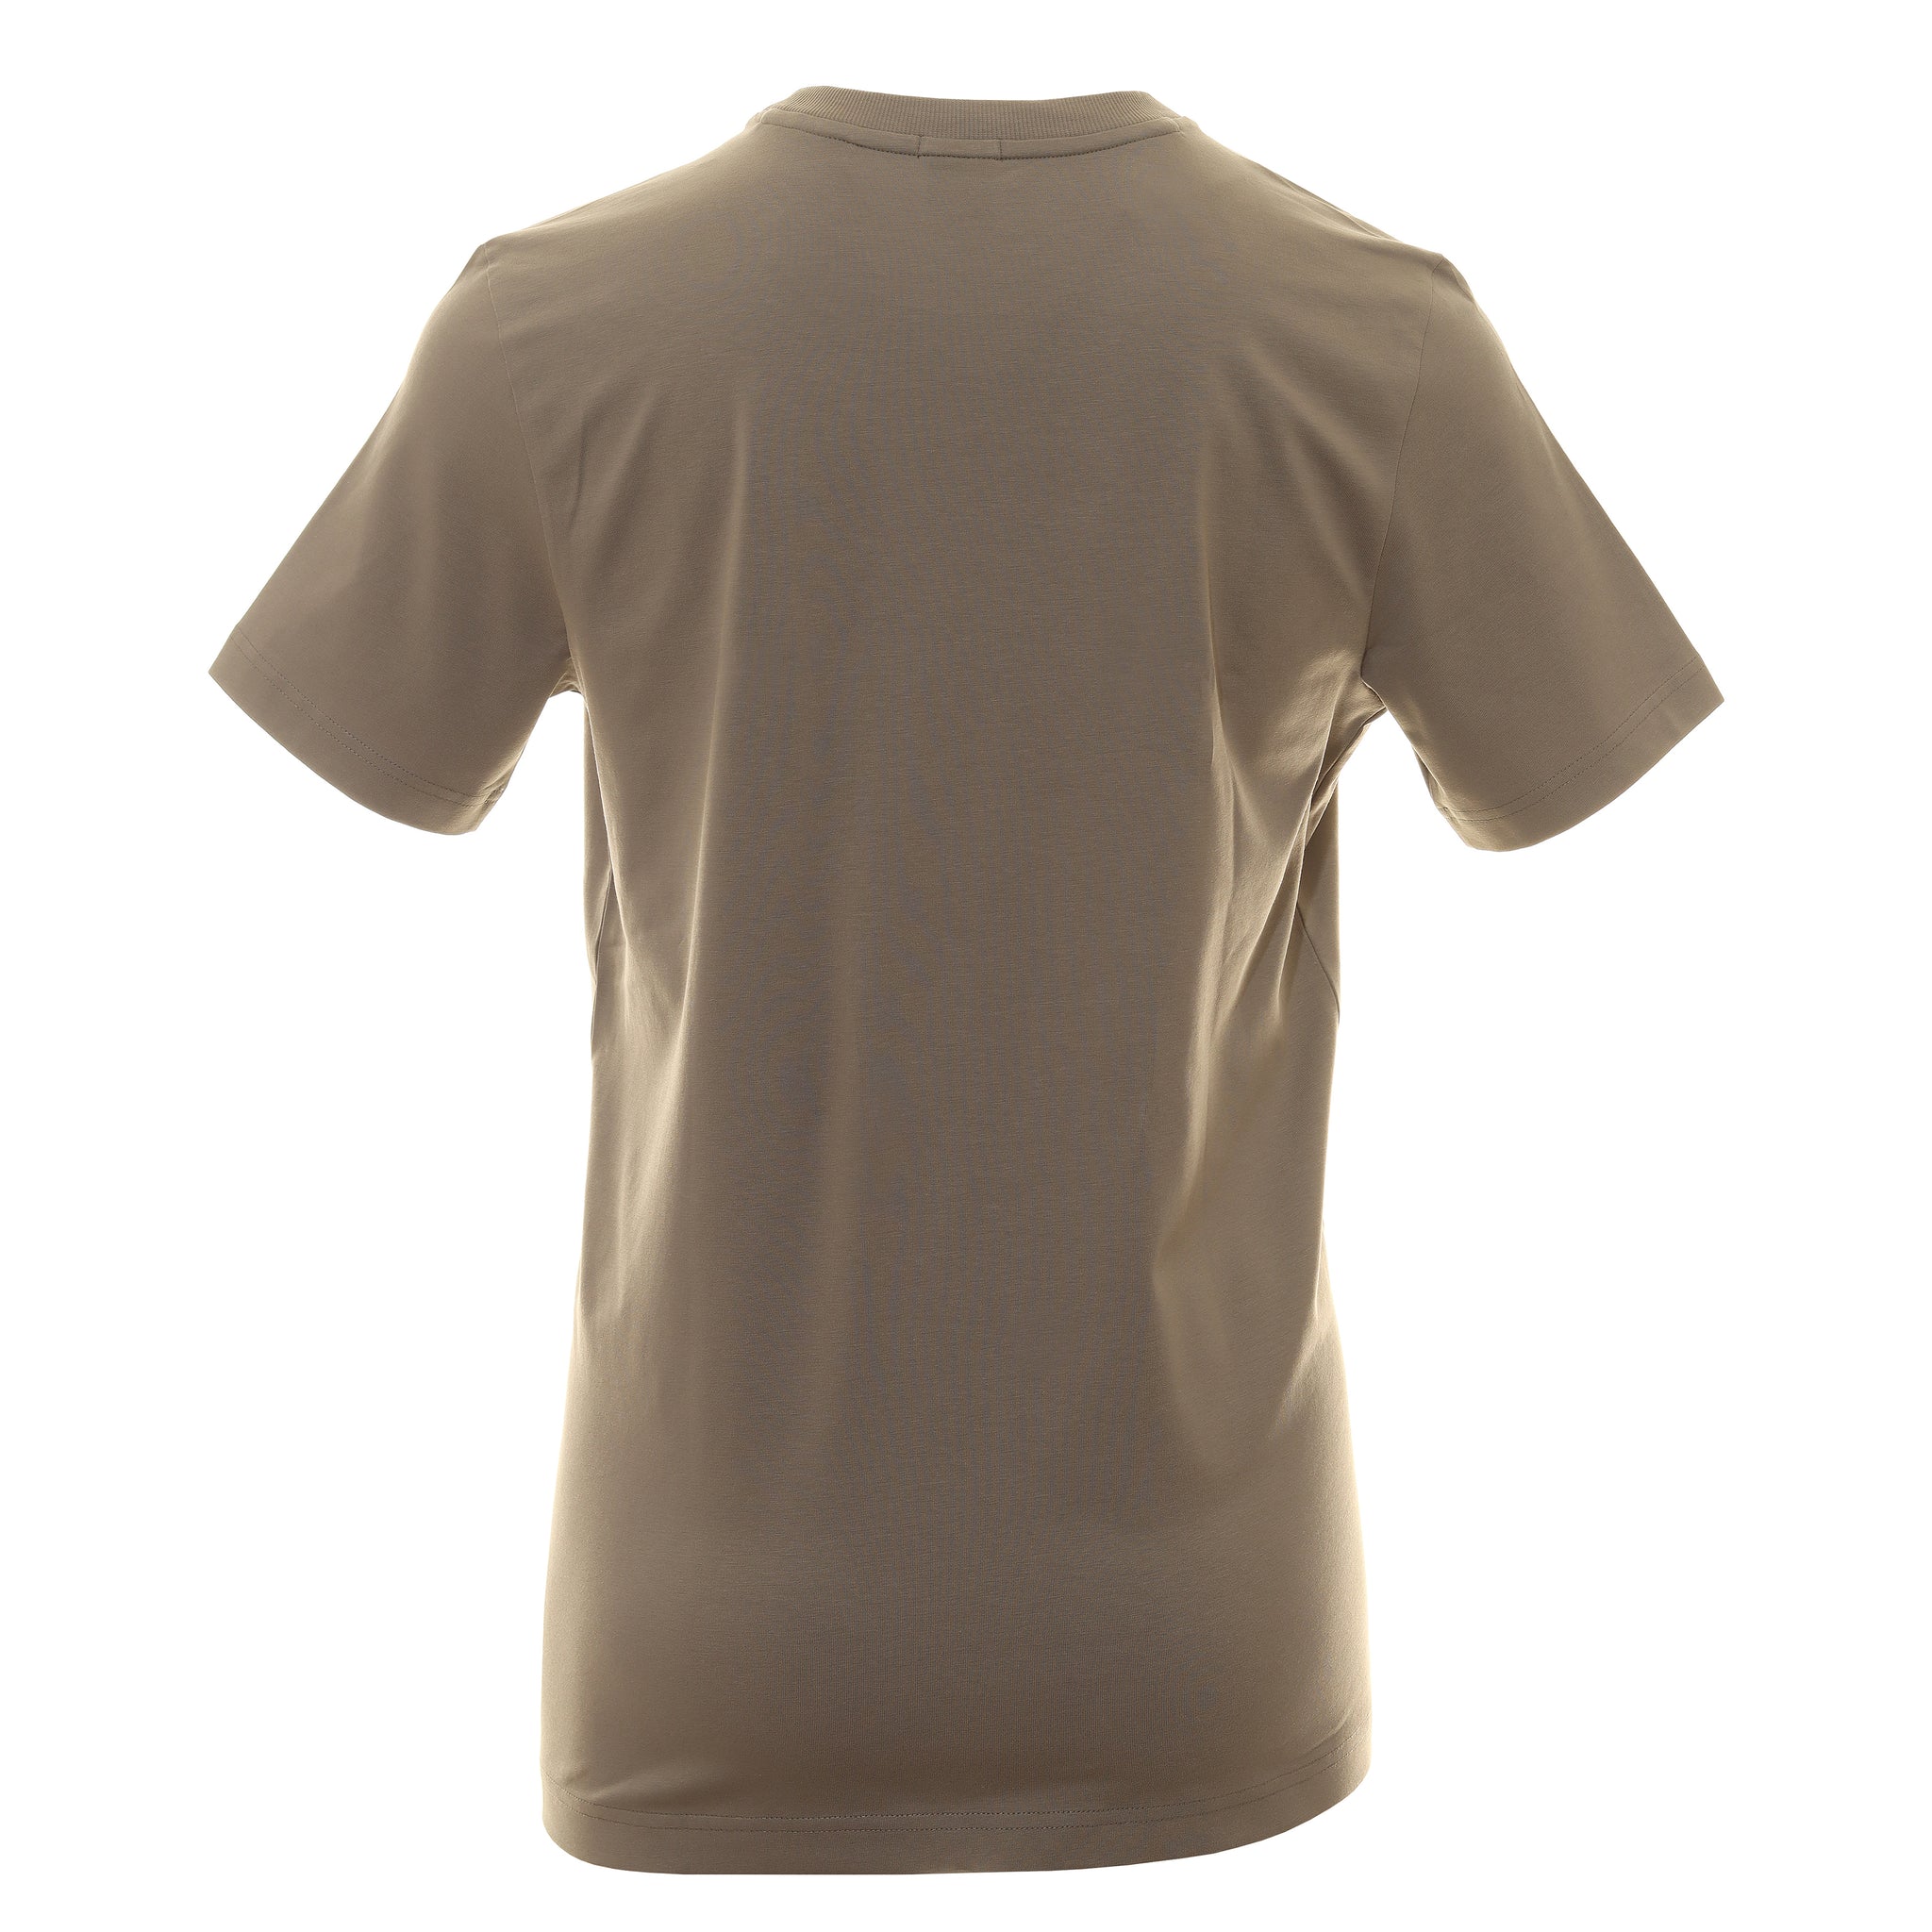 BOSS Tee Shirt 50475828 Taupe 339 | Function18 | Restrictedgs